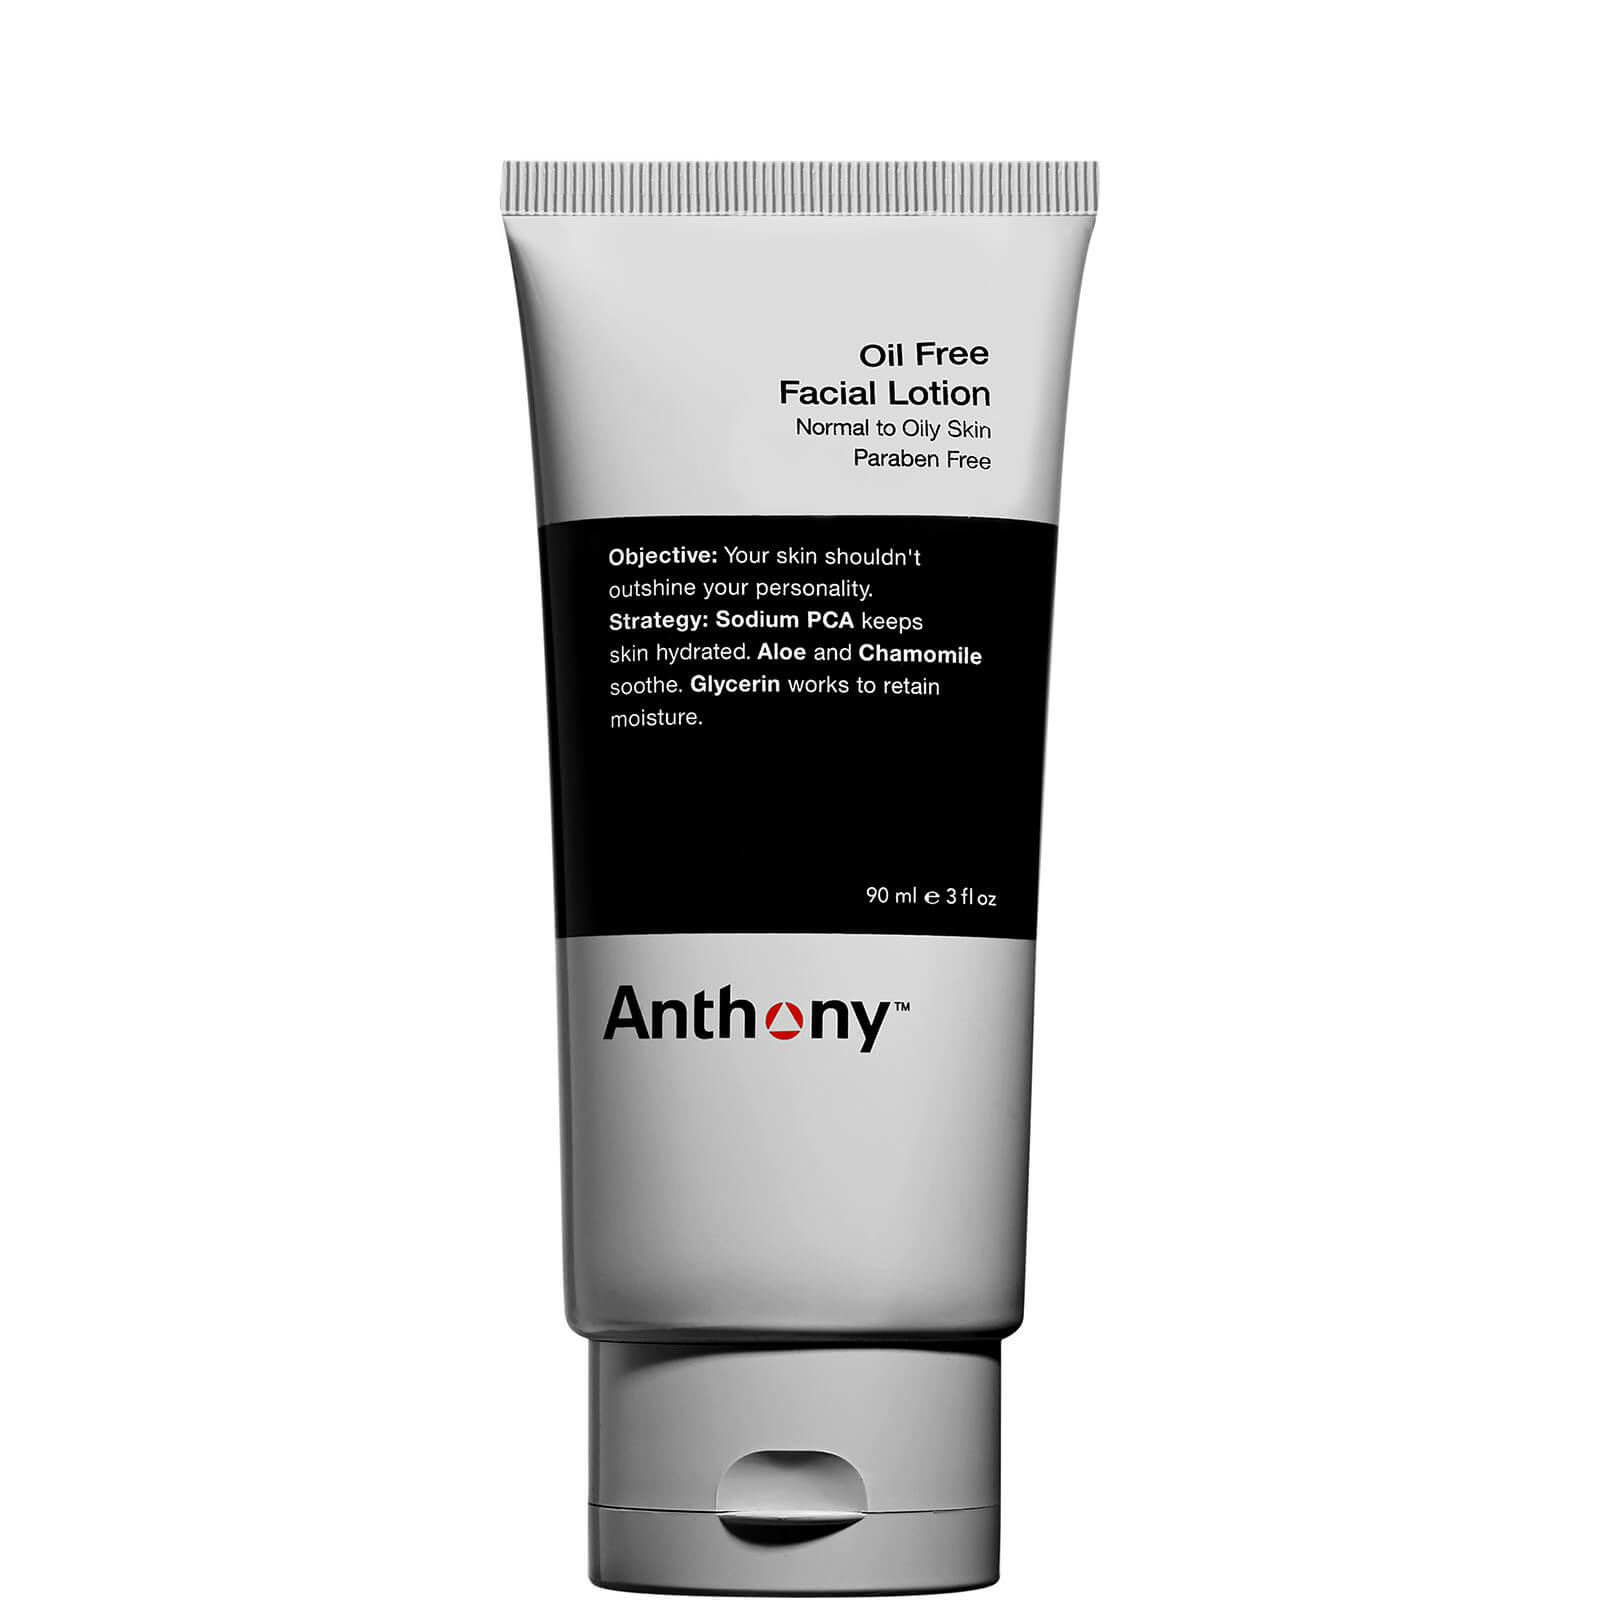 Image of Anthony Oil Free Facial Lotion 90ml